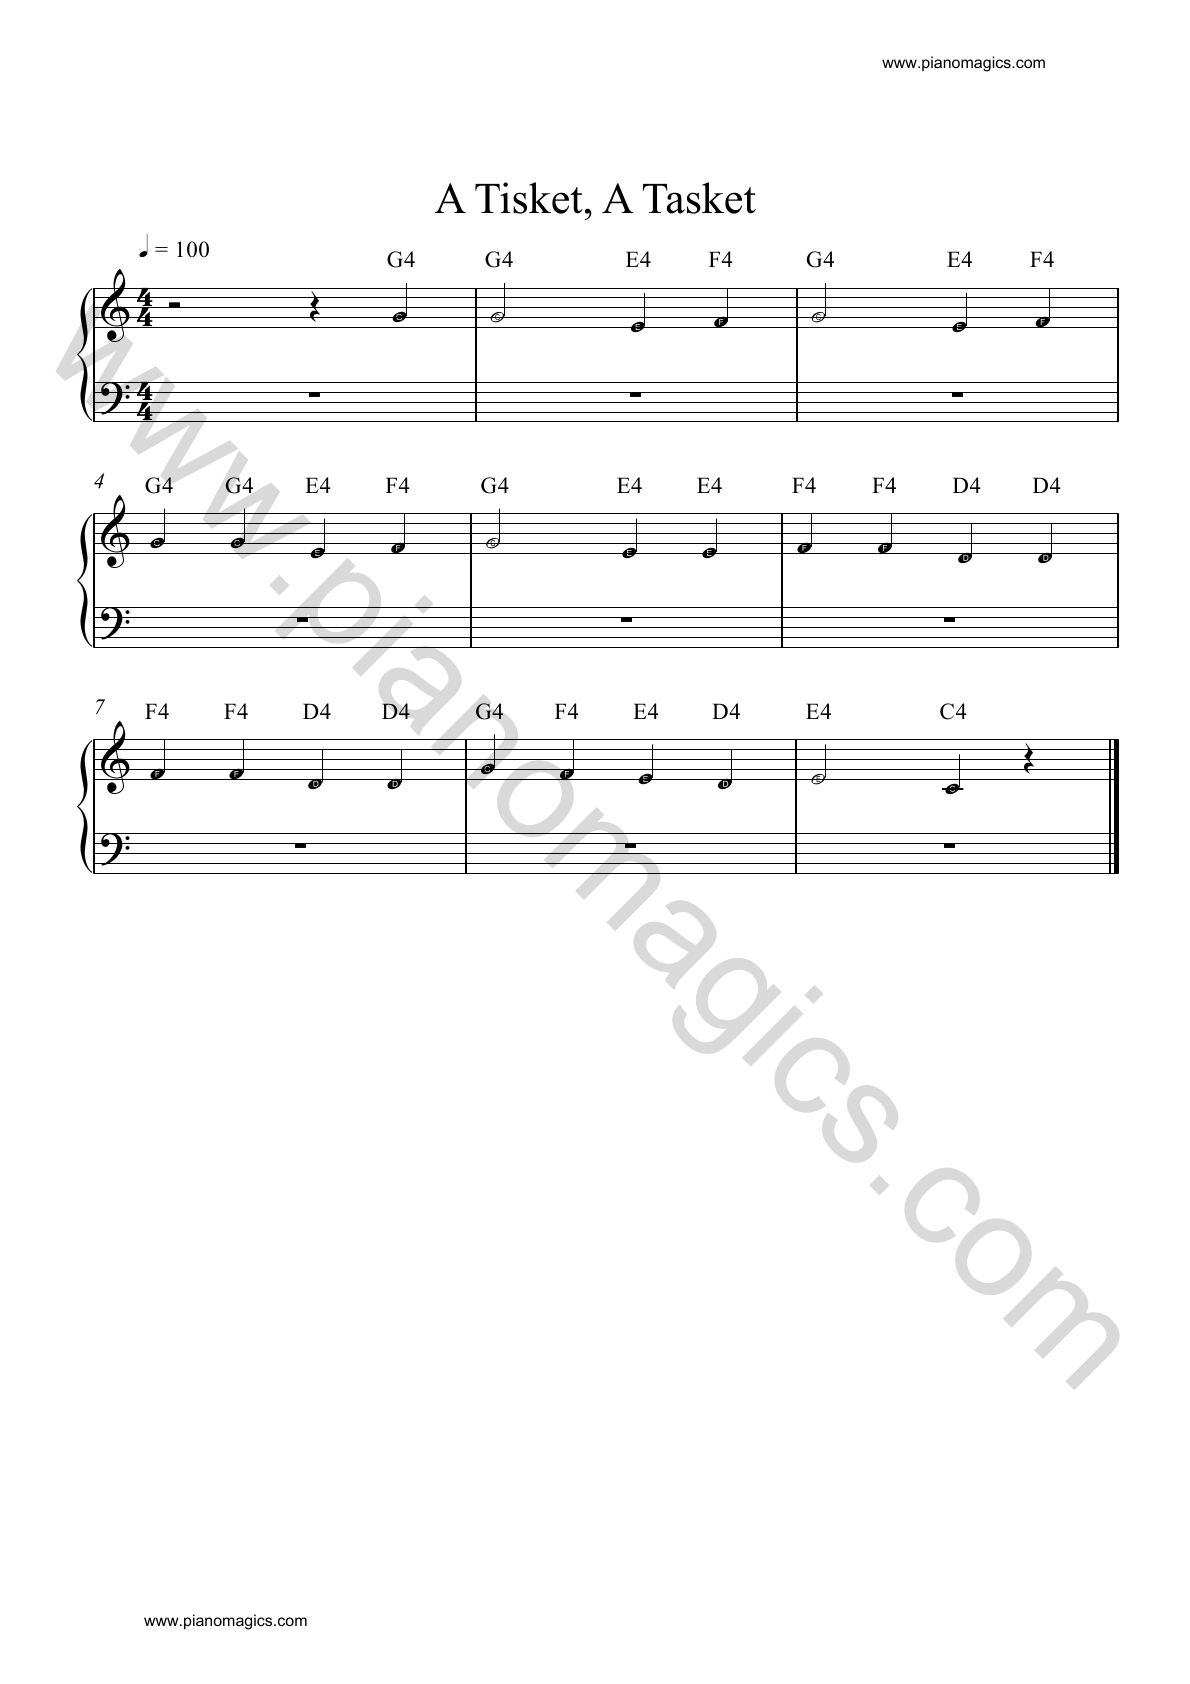 Get Your A Tisket A Tasket Sheet Music For Piano Along With Notes